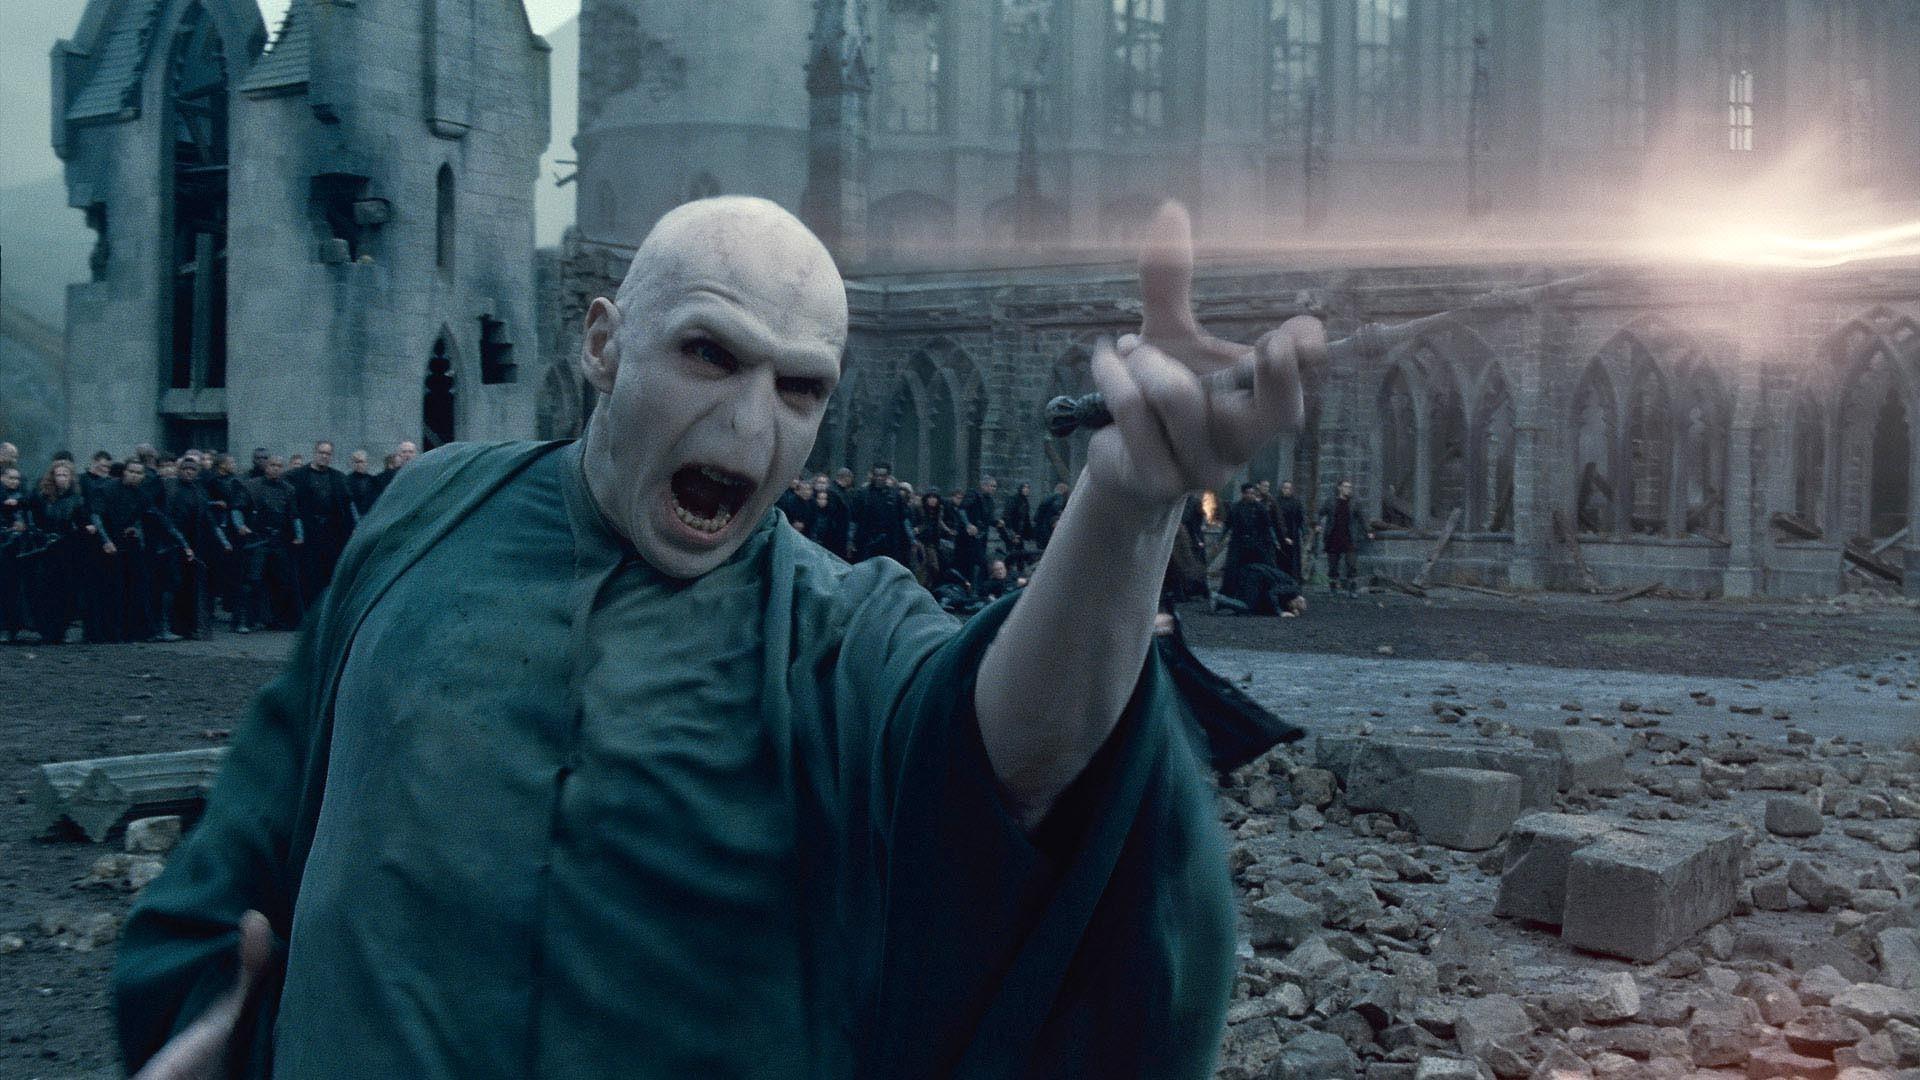 HD wallpaper, 1920X1080 Movies Harry Potter And The Deathly Hallows Lord Voldemort Wallpaper Jpg 448 Kb